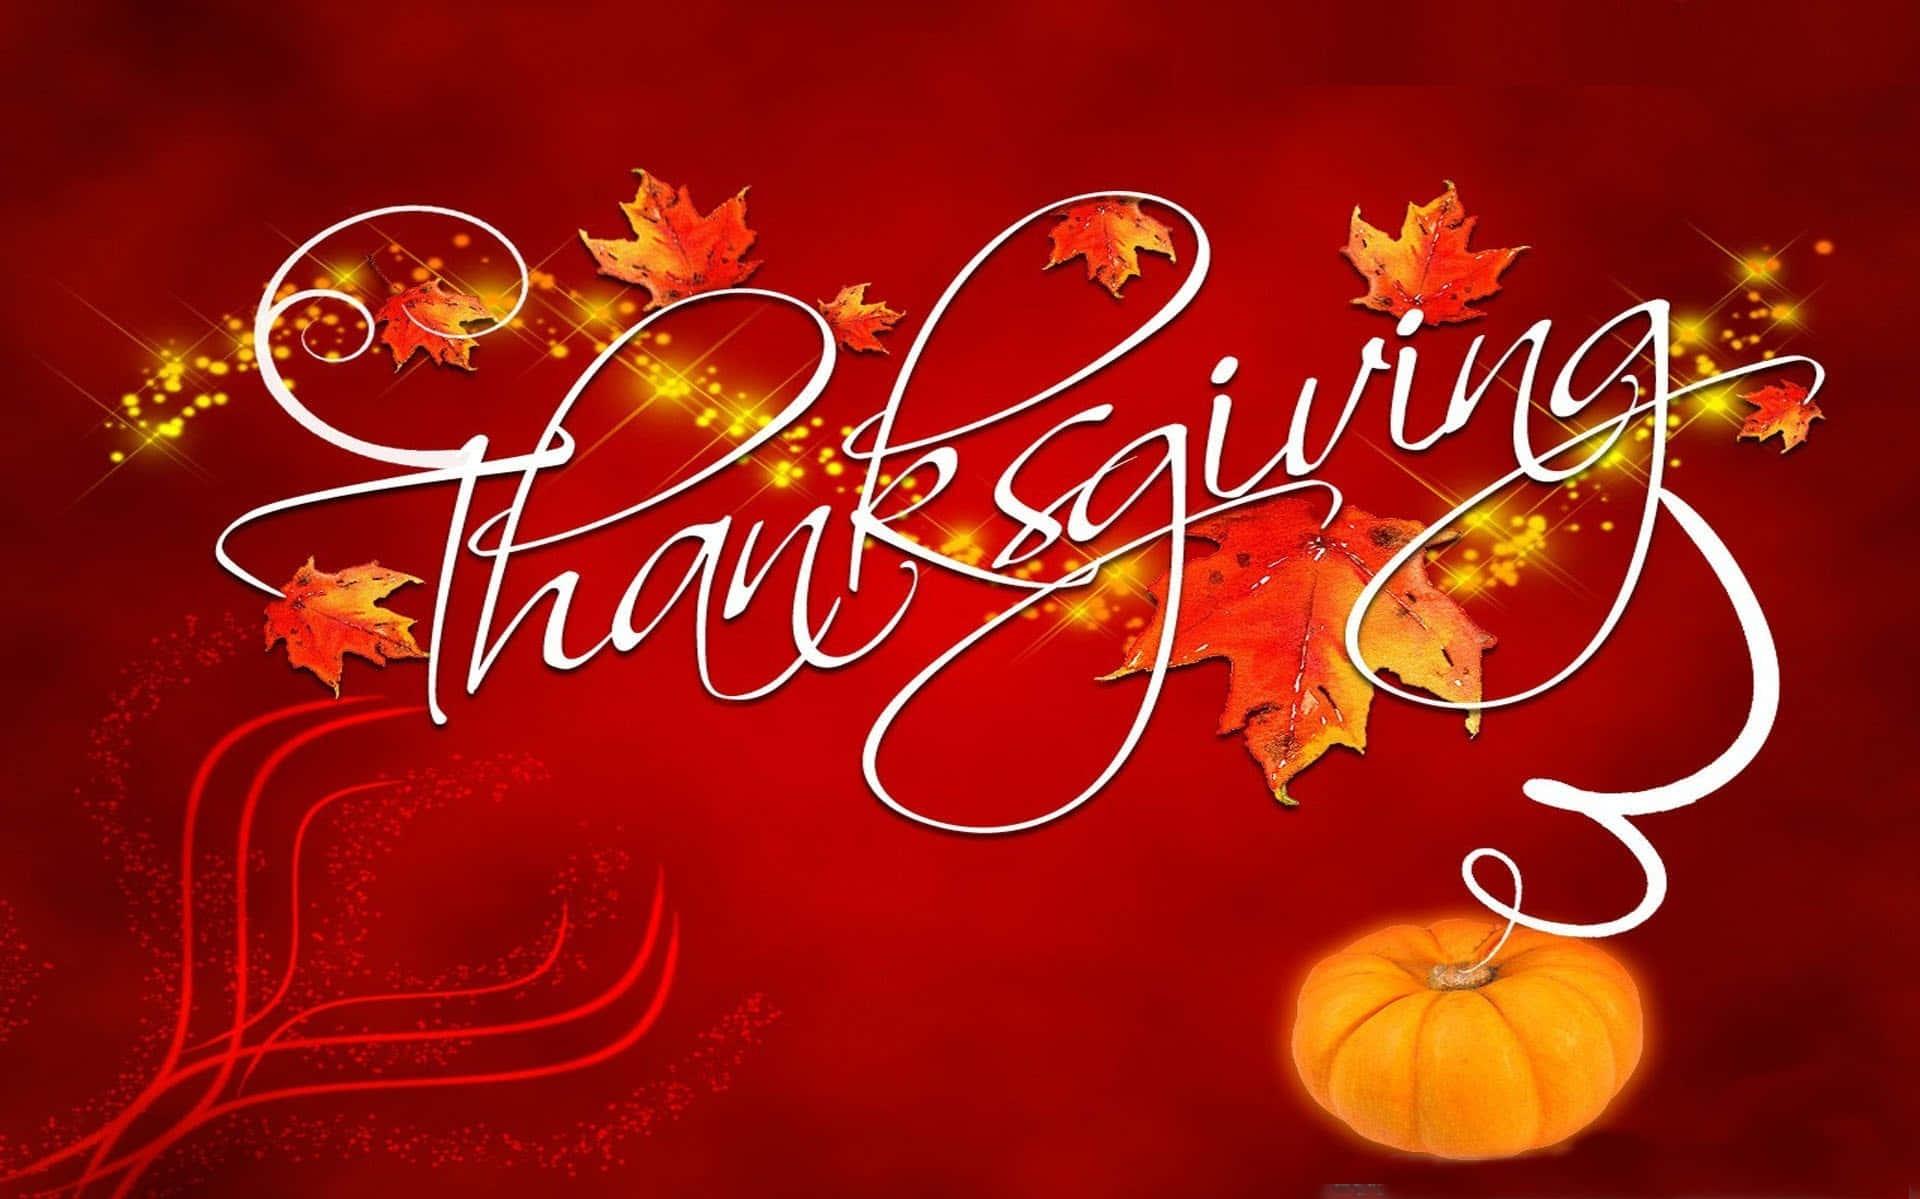 Celebrate The Most Beautiful Thanksgiving With Your Loved